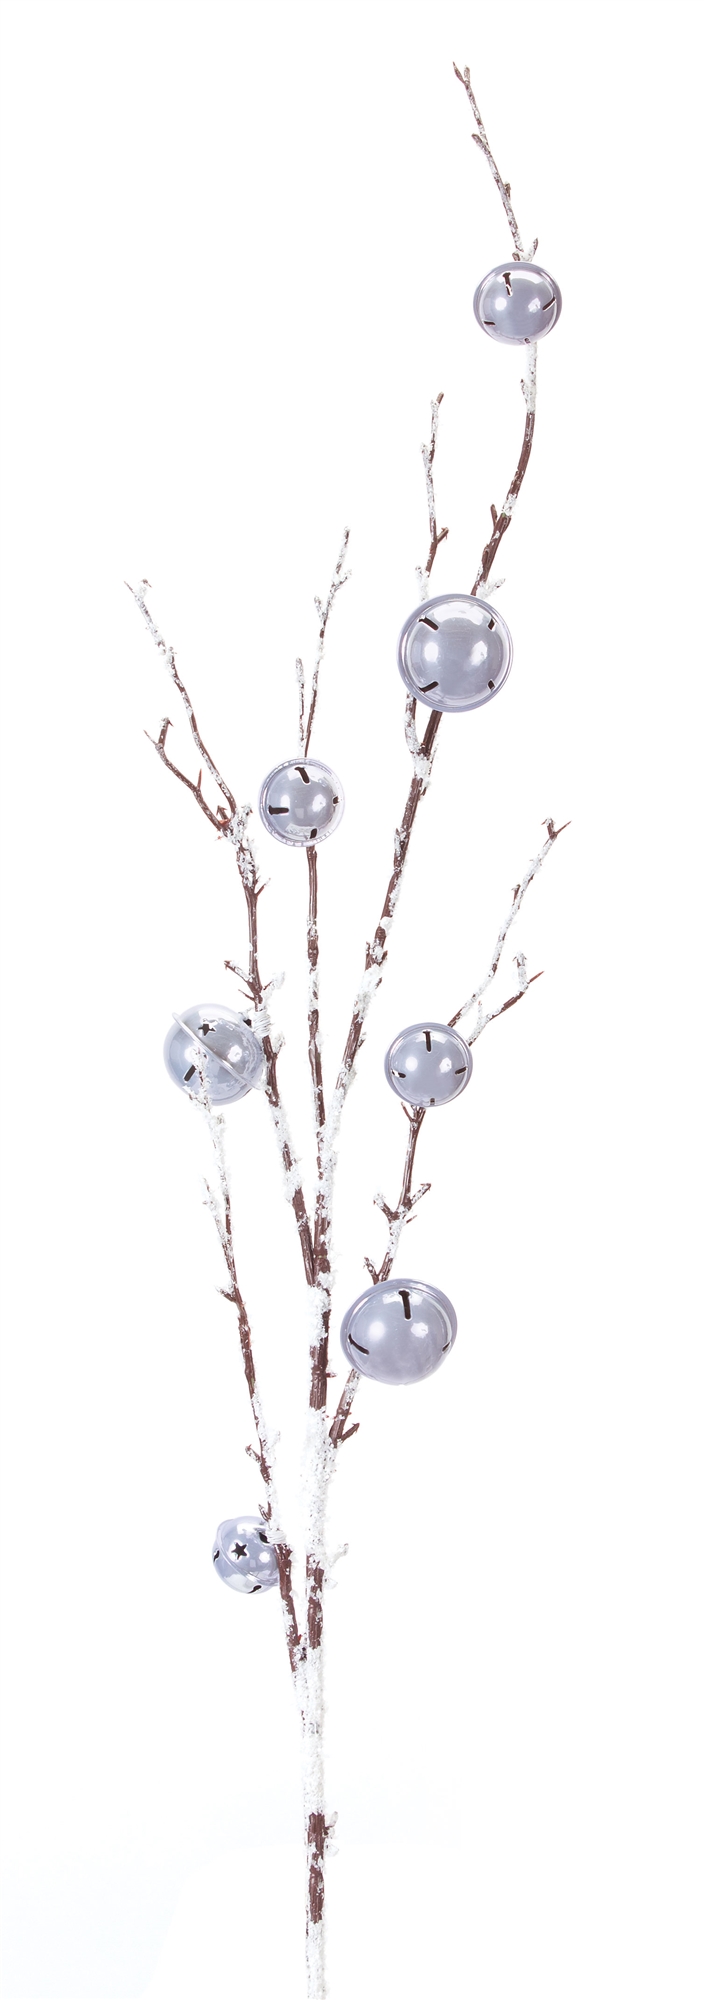 Twig Spray with Bells (Set of 12) 35"H Plastic